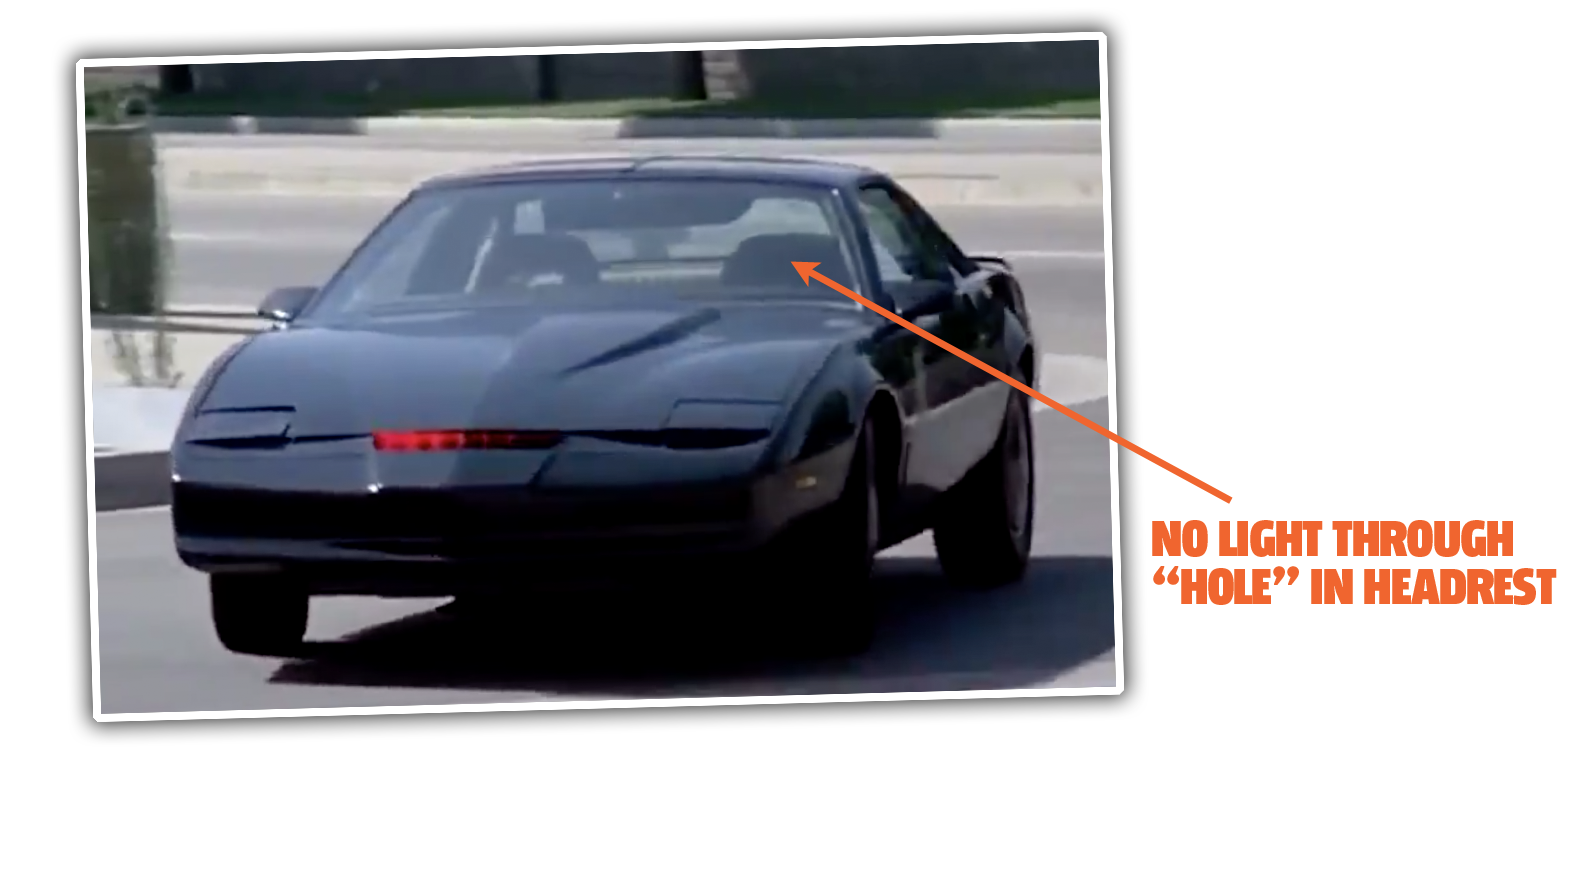 Knight Rider Had The Best Trick For Faking A Self-Driving Car